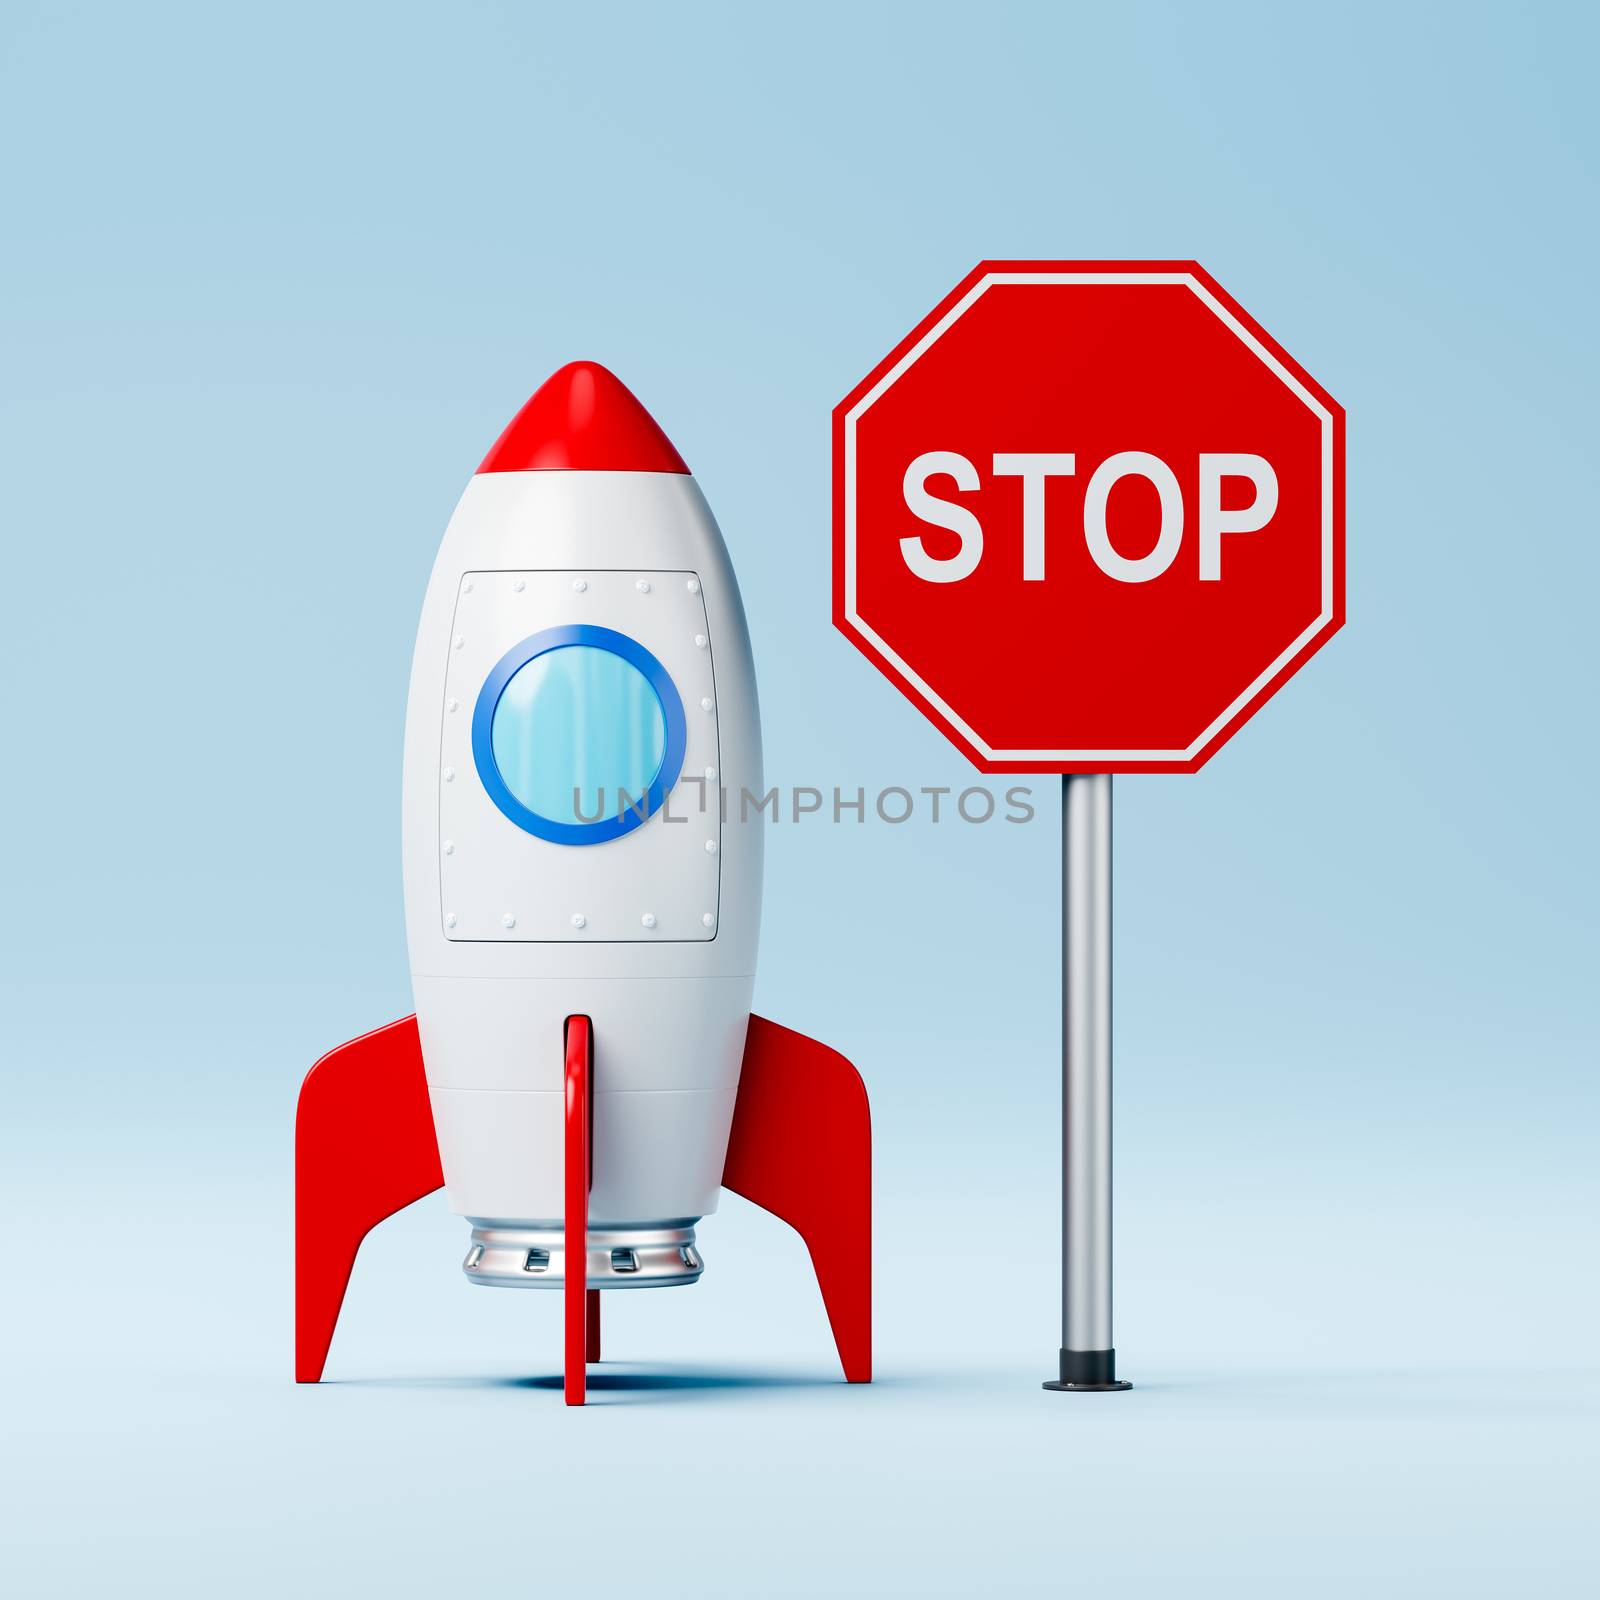 Red and White Cartoon Spaceship and Red Stop Road Sign on Blue Background 3D Illustration